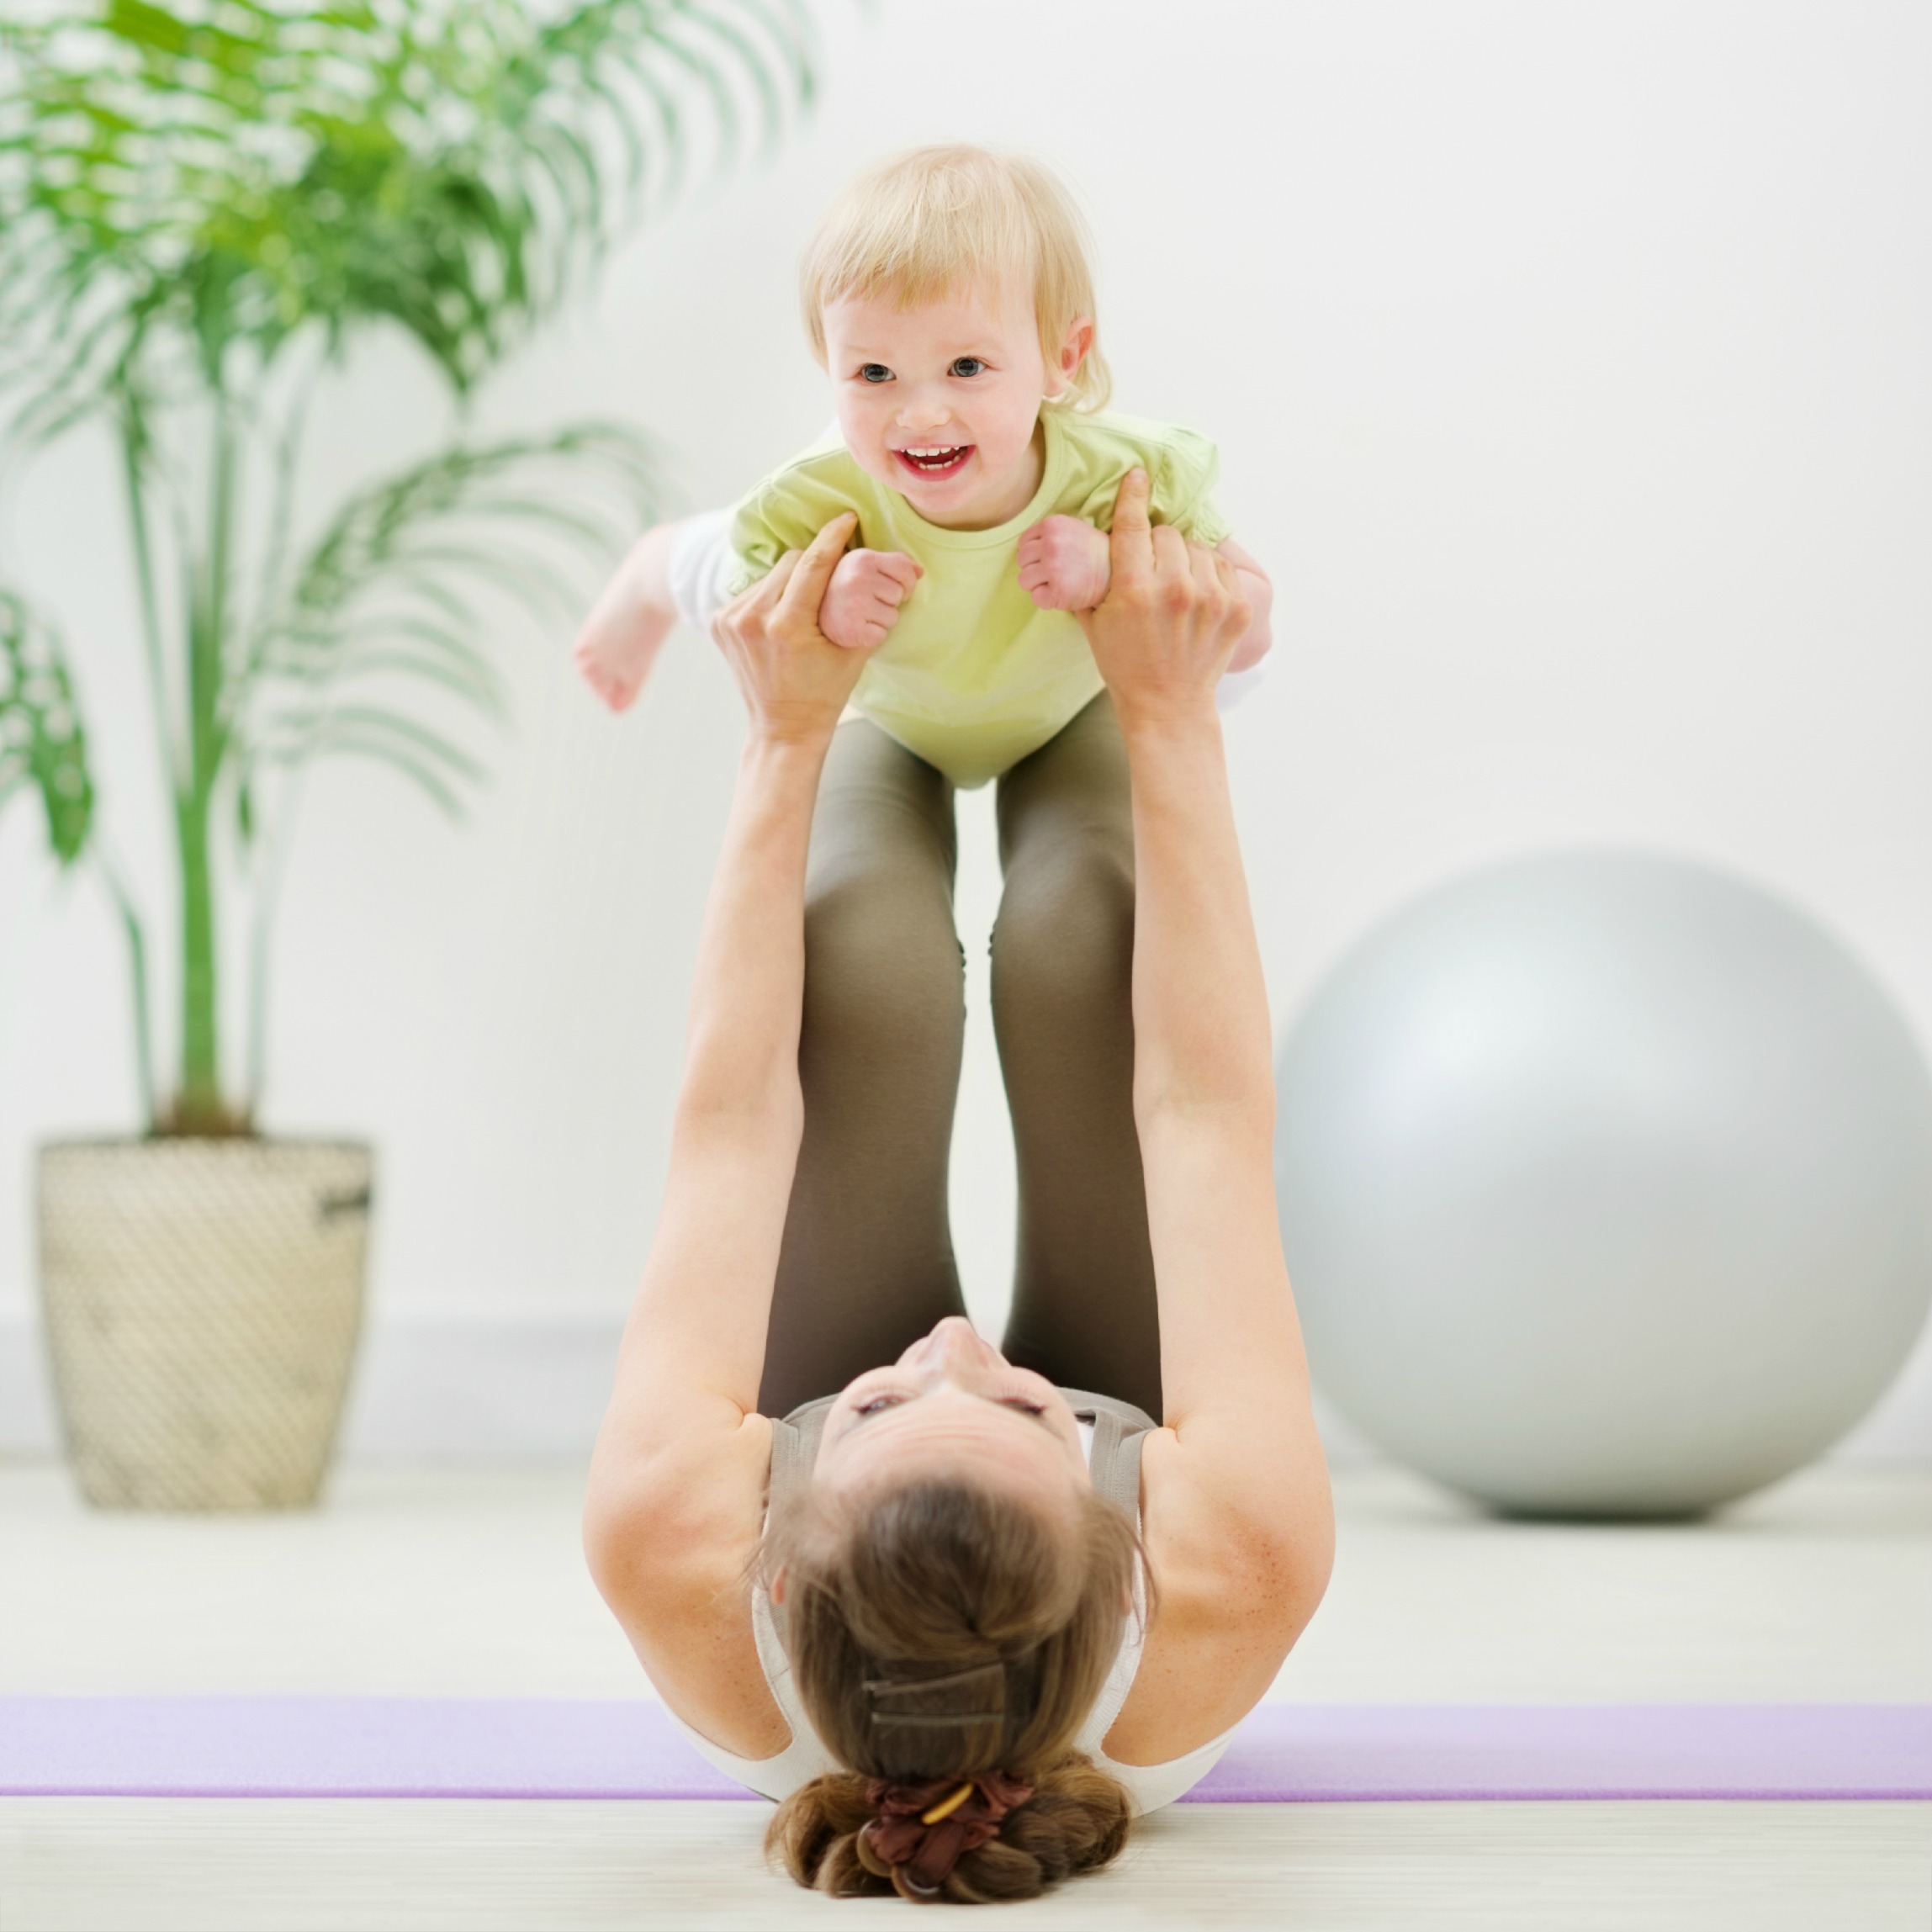 5 Easy Ways For Moms To Be More Active